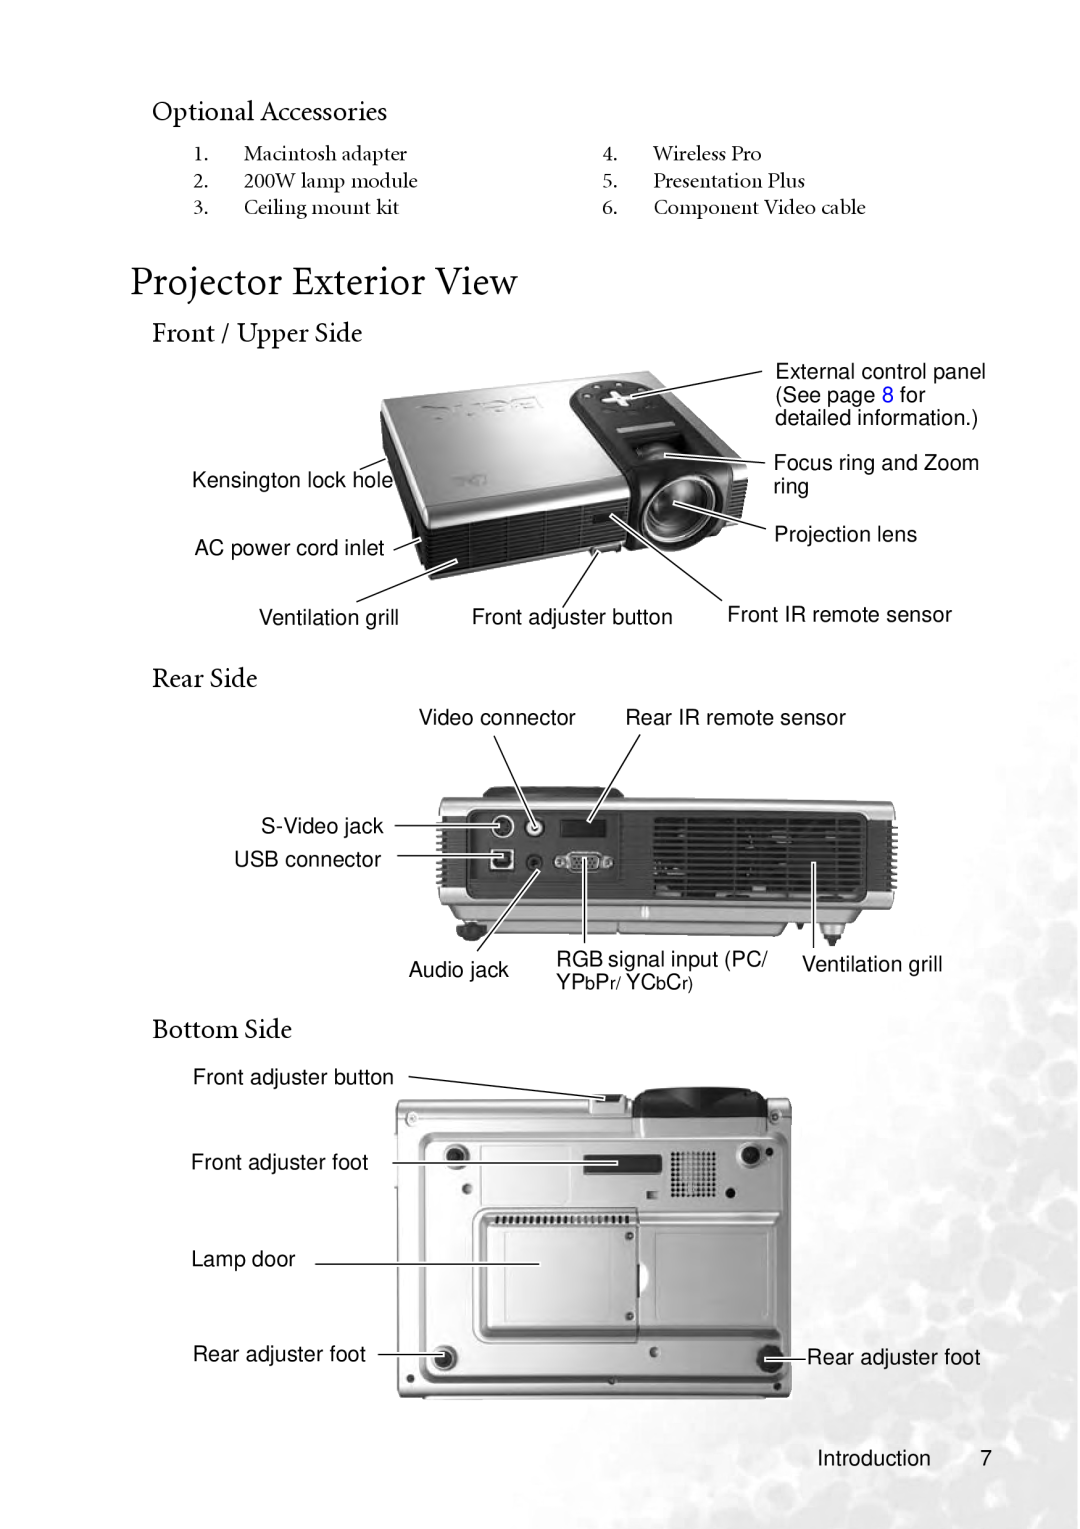 BenQ PB2240 user manual Projector Exterior View, Optional Accessories, Front / Upper Side, Rear Side, Bottom Side 